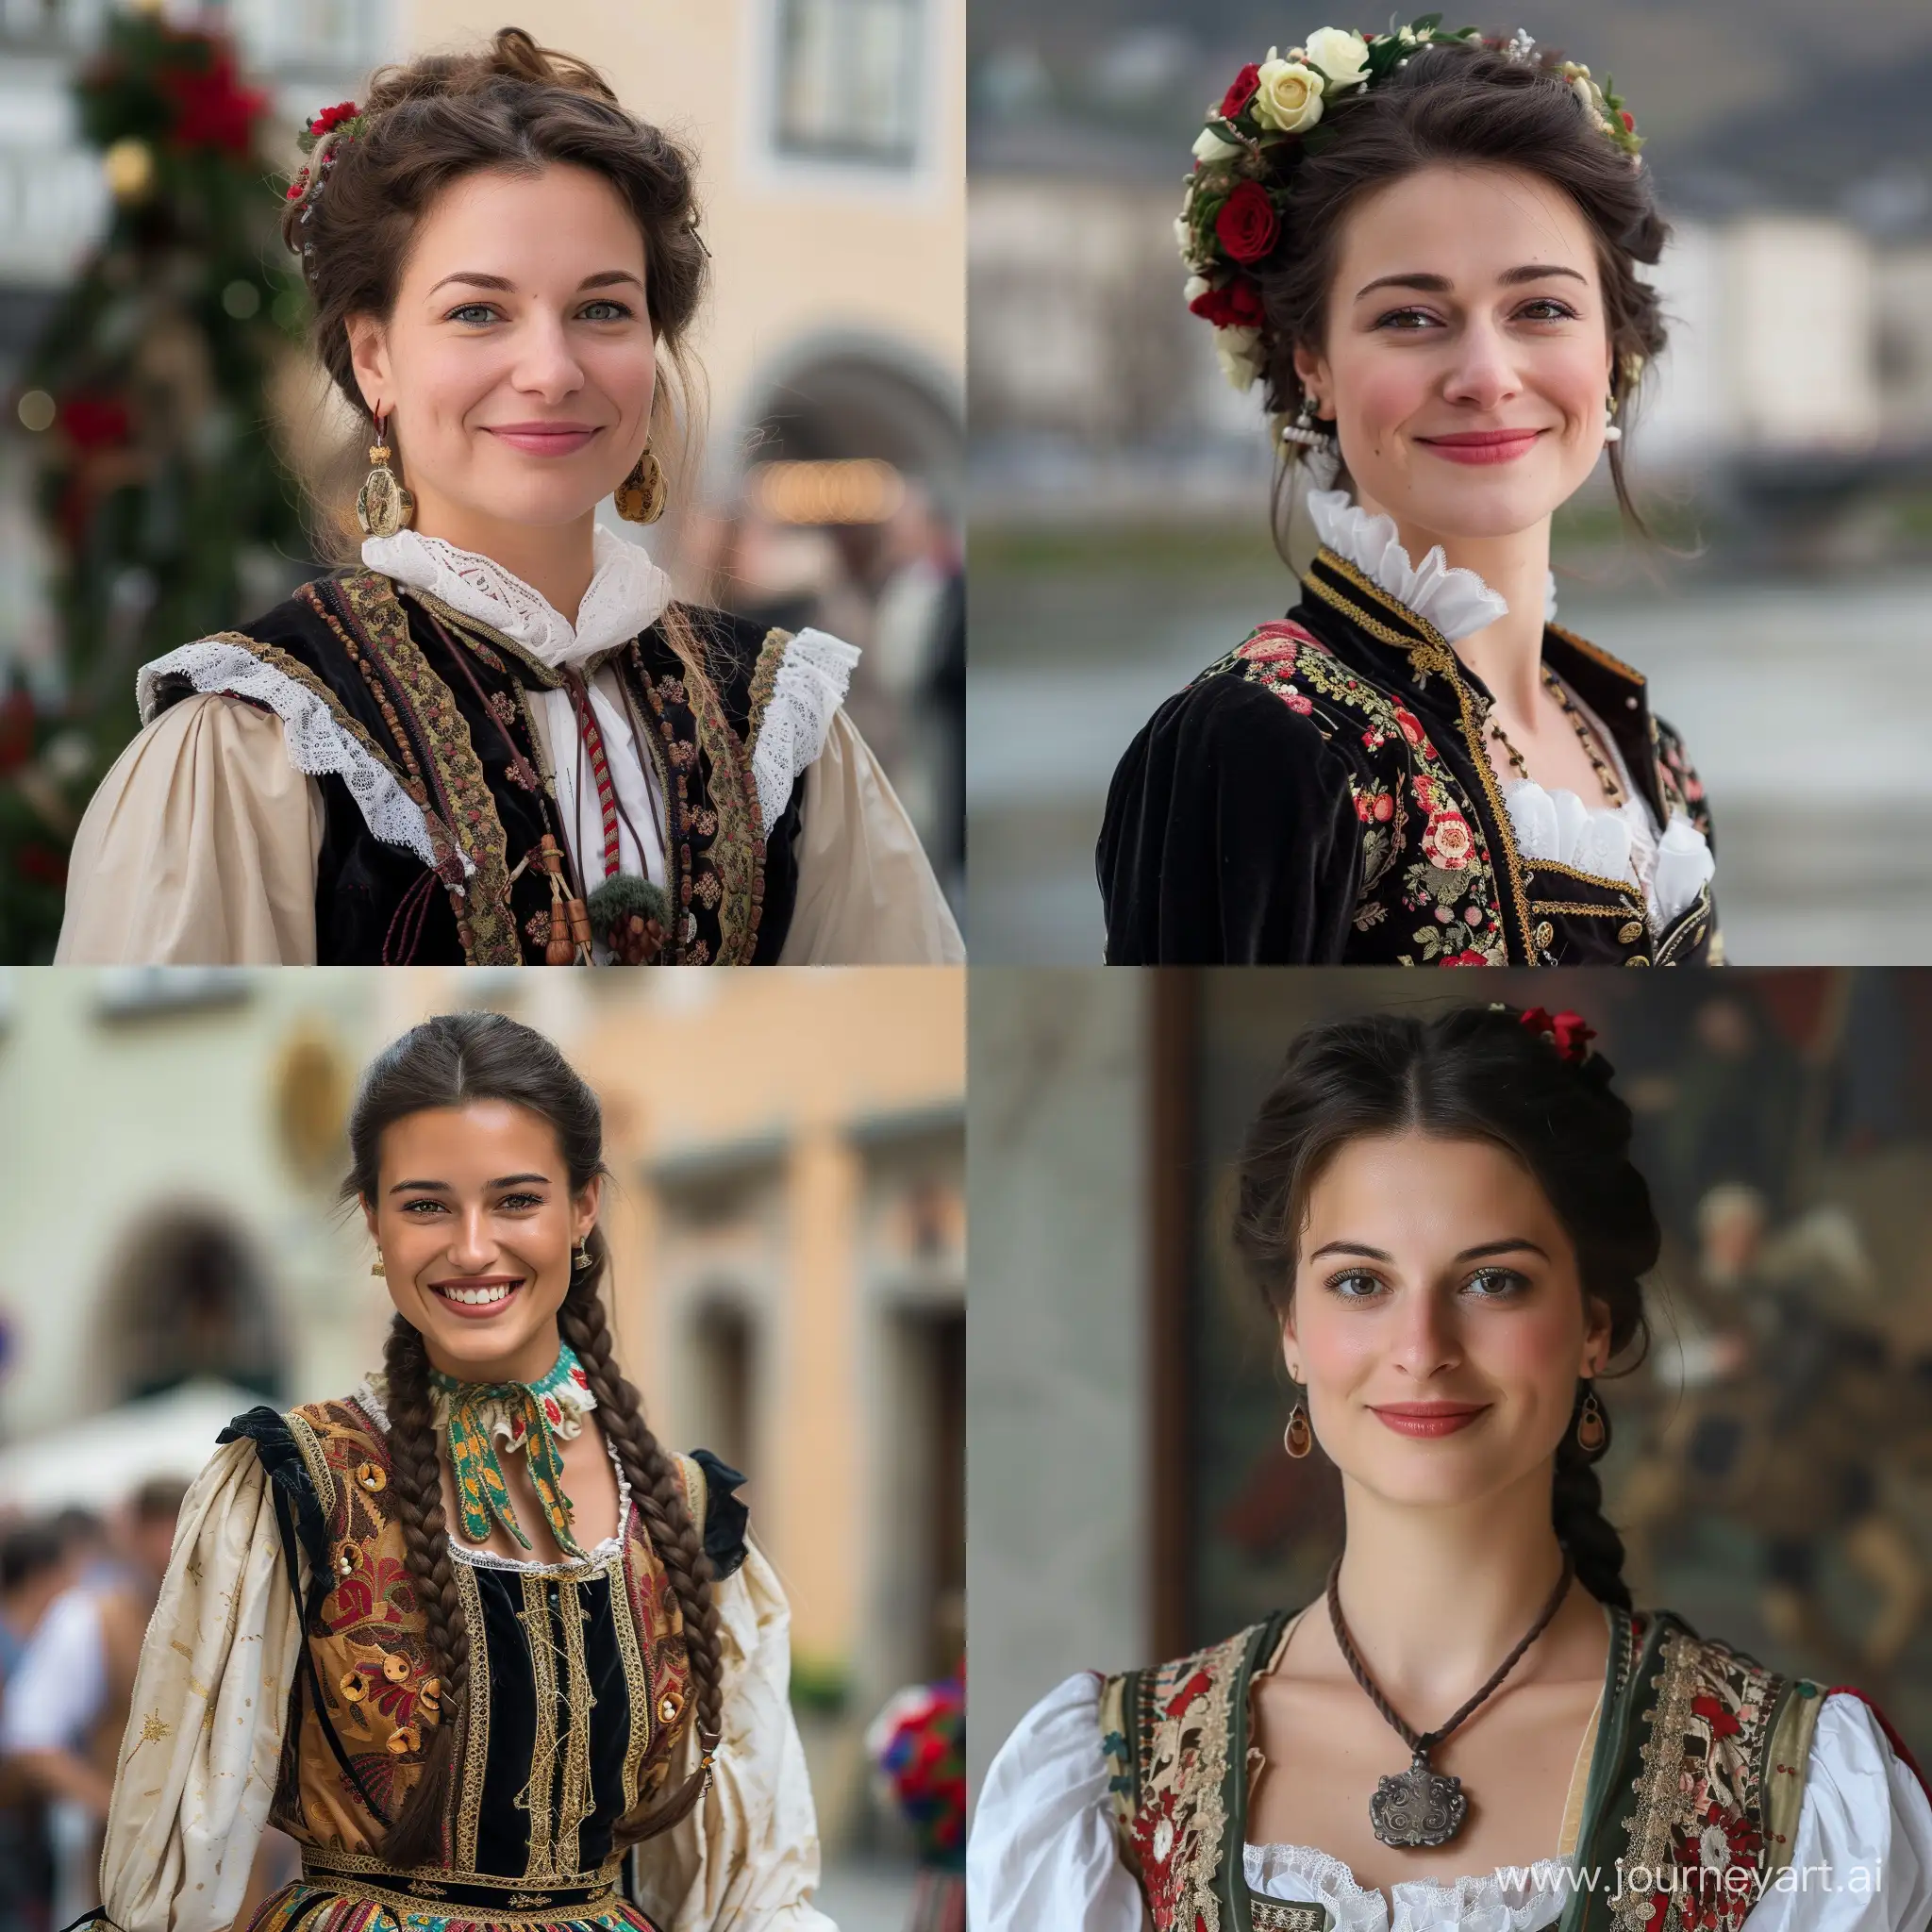 Traditional-Costume-Portrait-of-a-Brunette-Woman-in-Salzburg